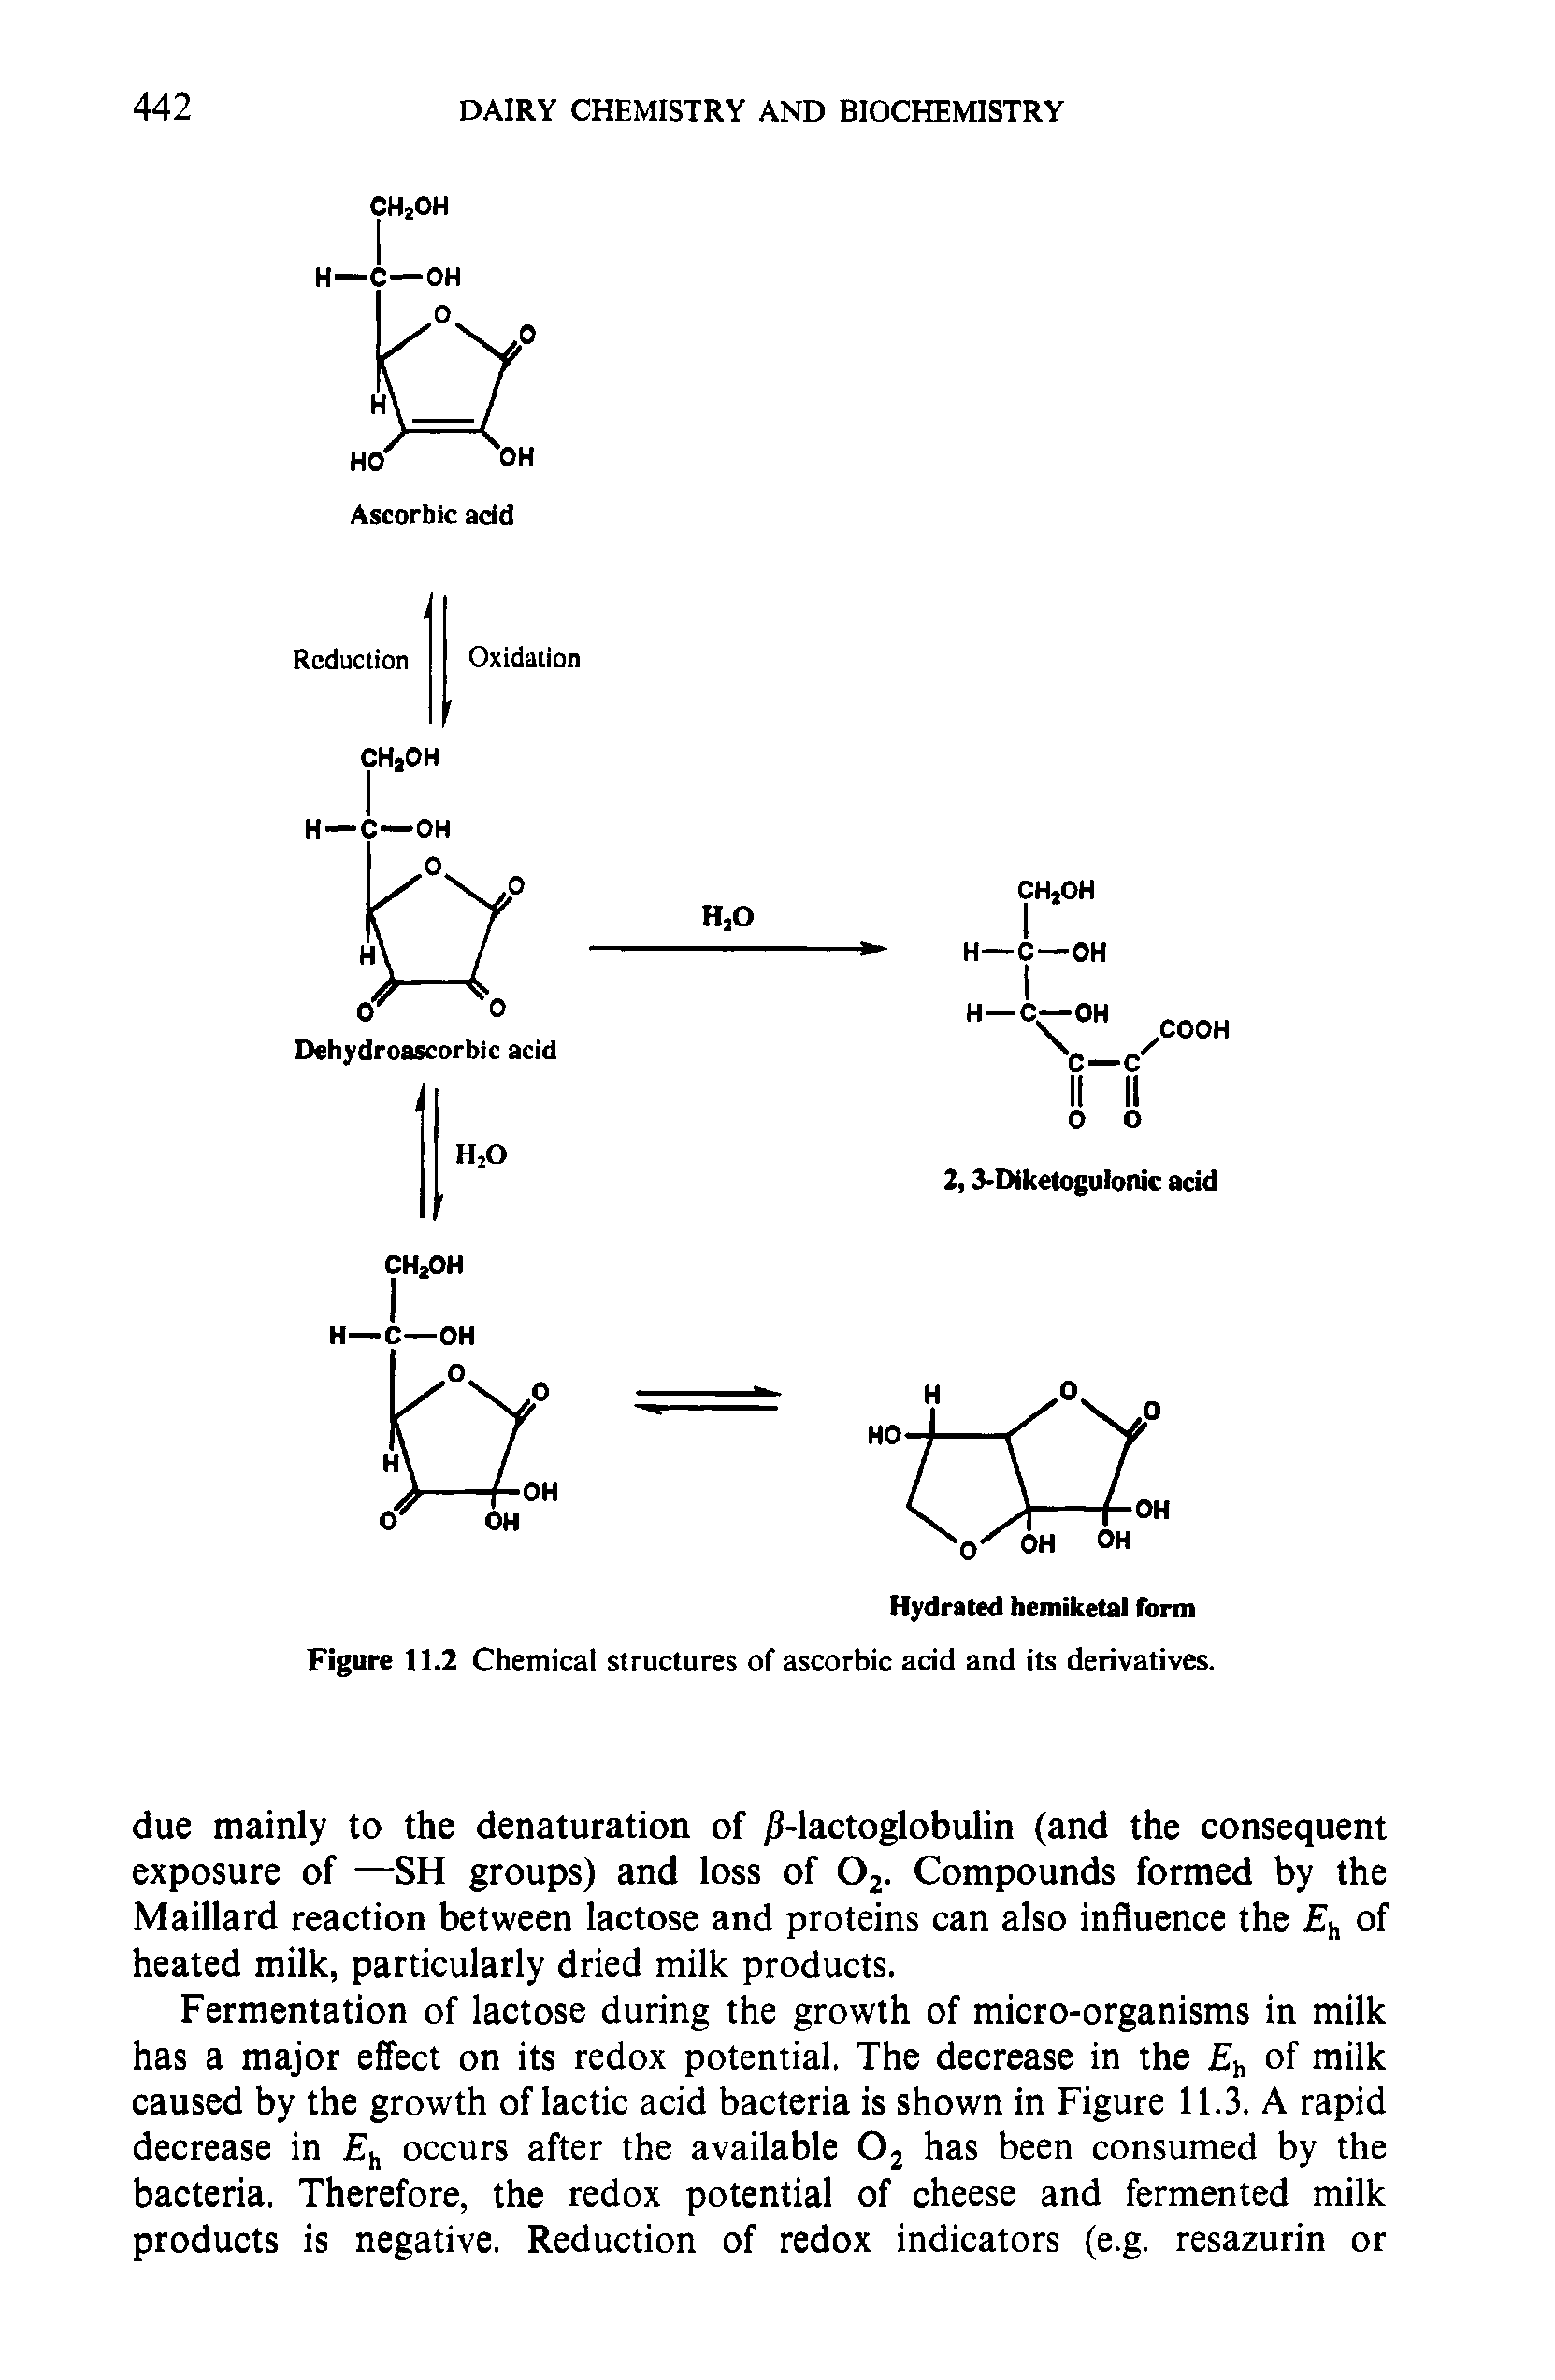 Figure 11.2 Chemical structures of ascorbic acid and its derivatives.